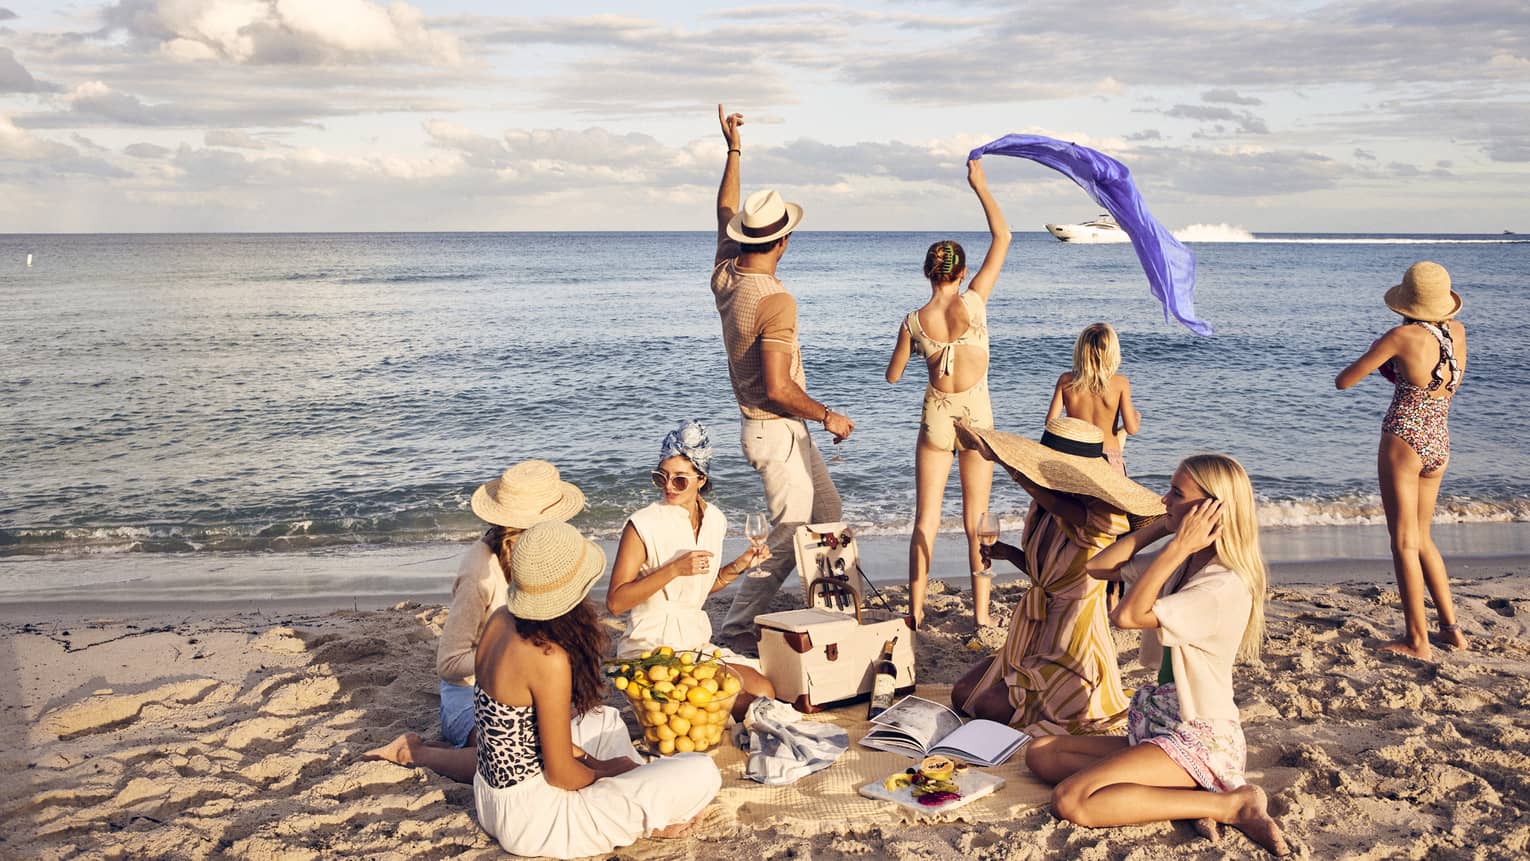 A group of people having a picnic on a beach.